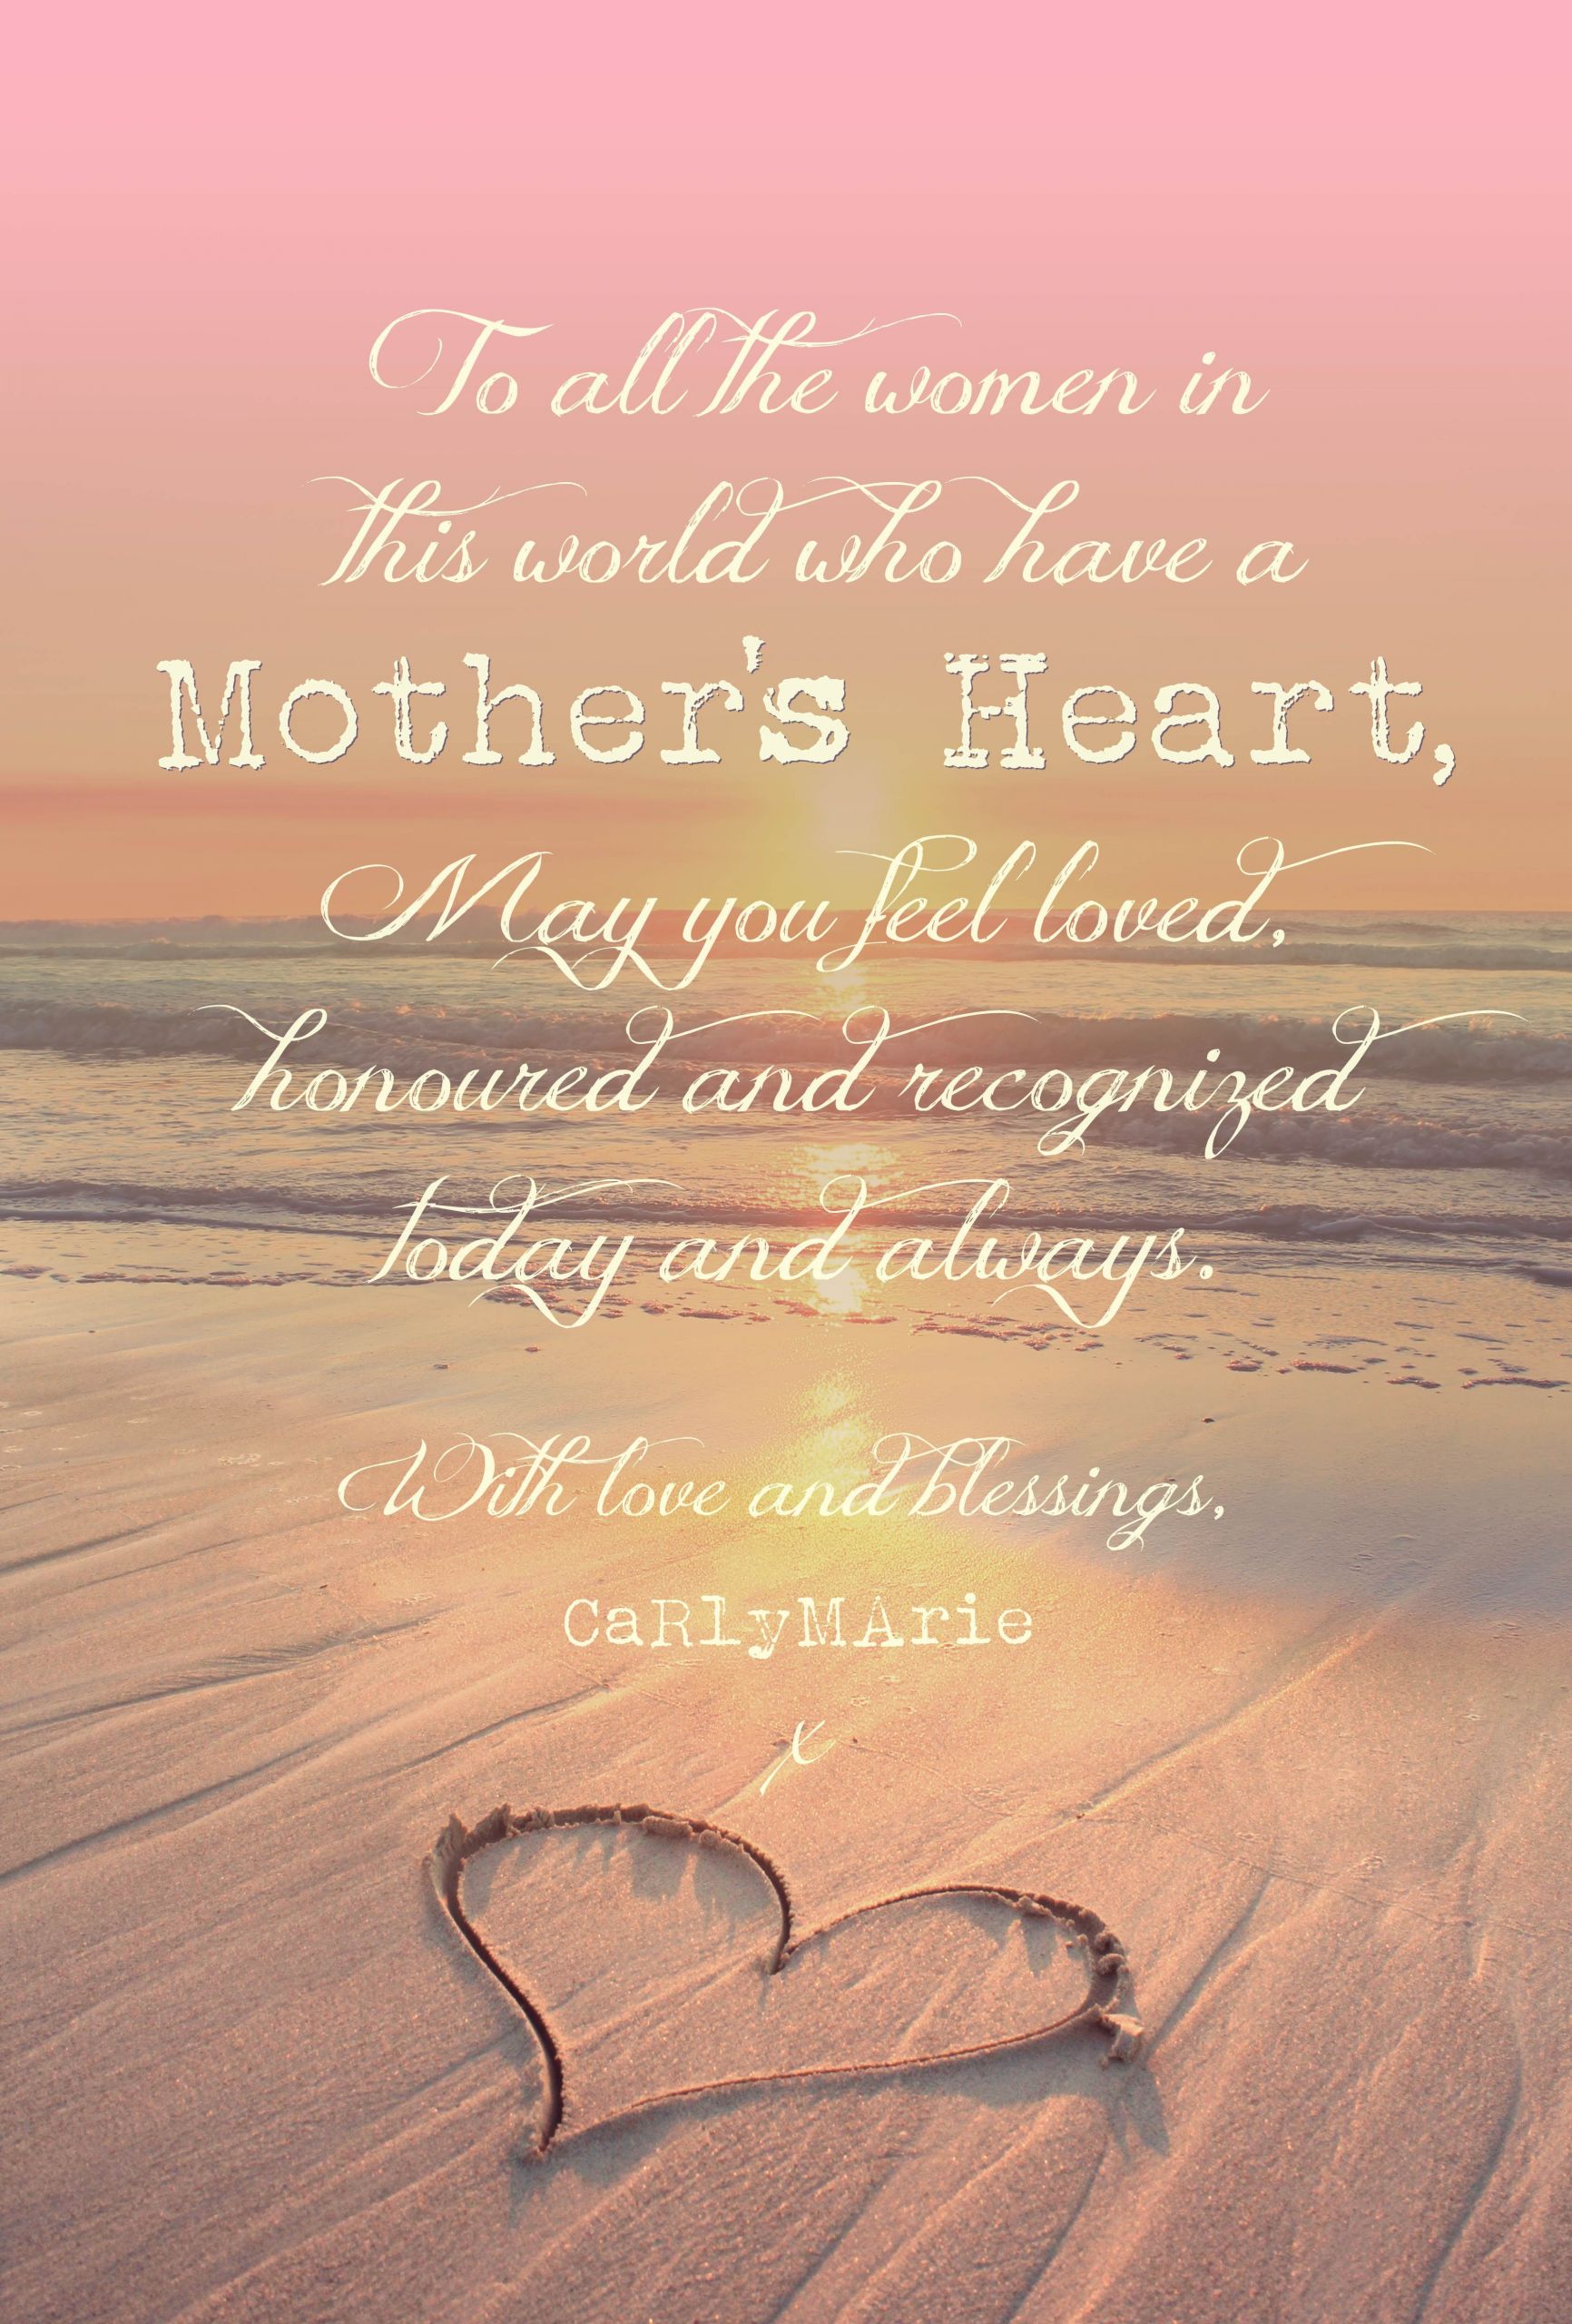 Quotes For Loss Of Mother
 Loss Mother Quotes QuotesGram